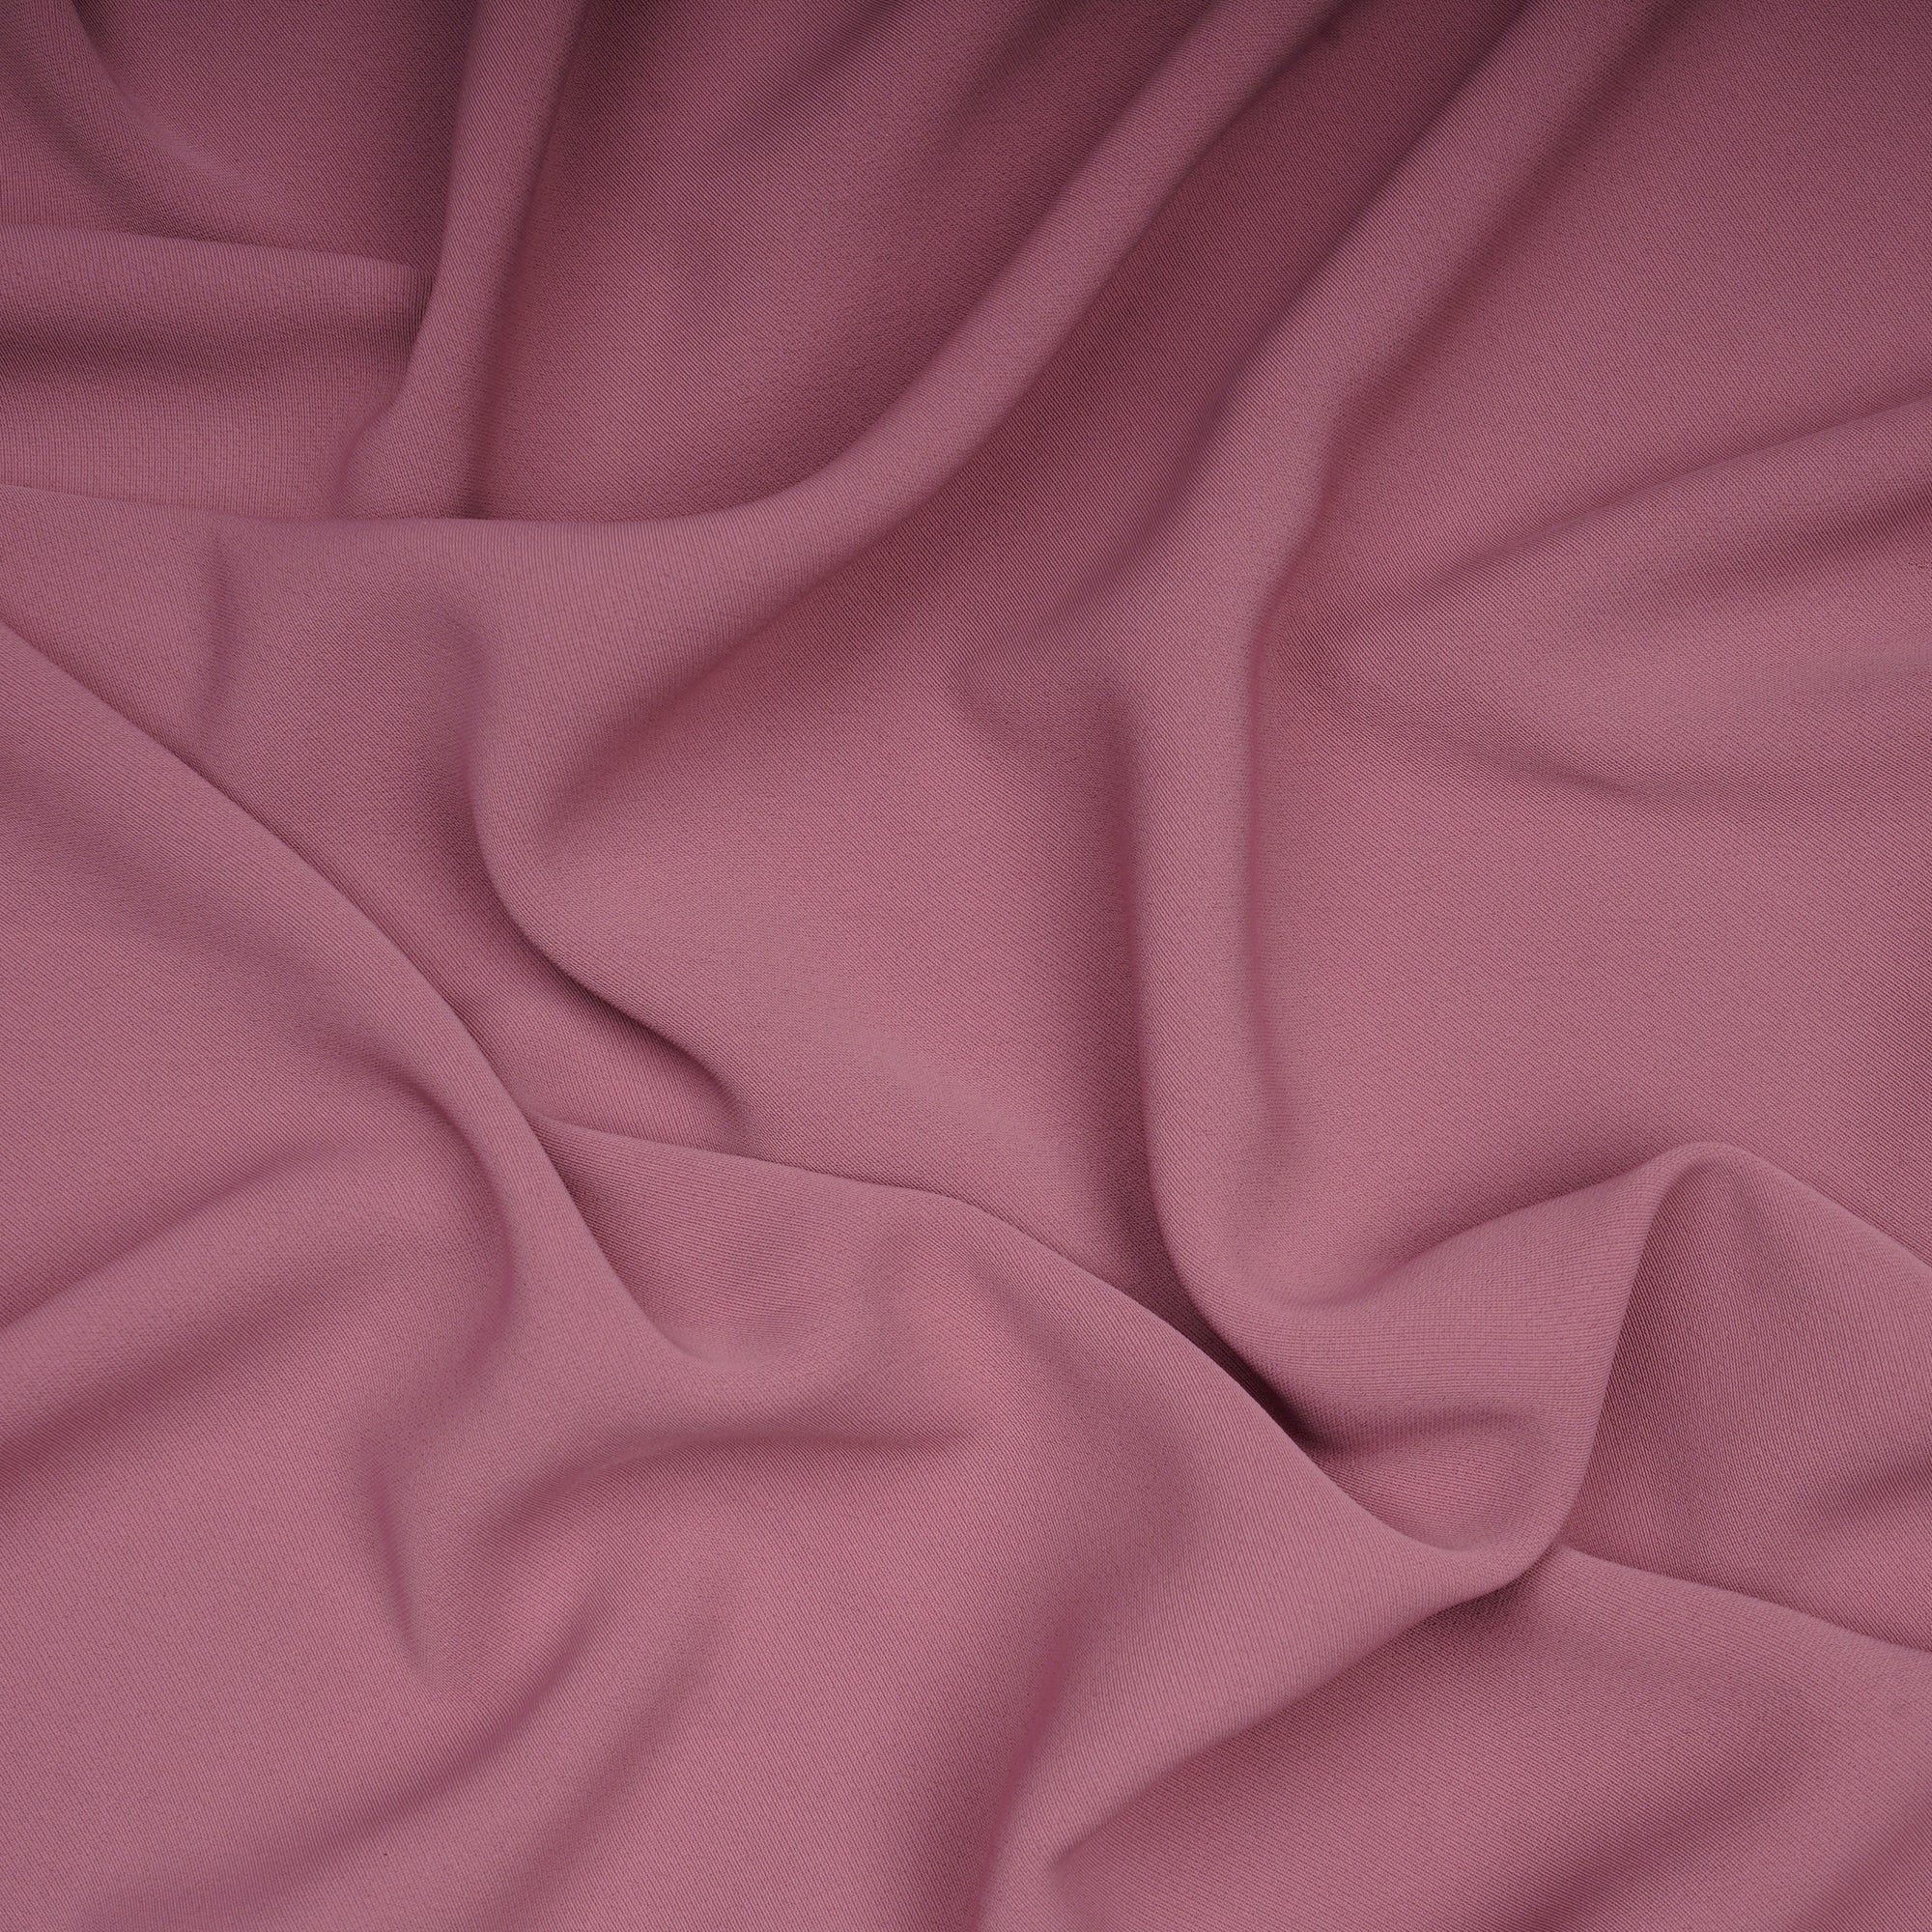 Foxglove Solid Dyed Imported Mesh Twill Satin Fabric (60" Width)